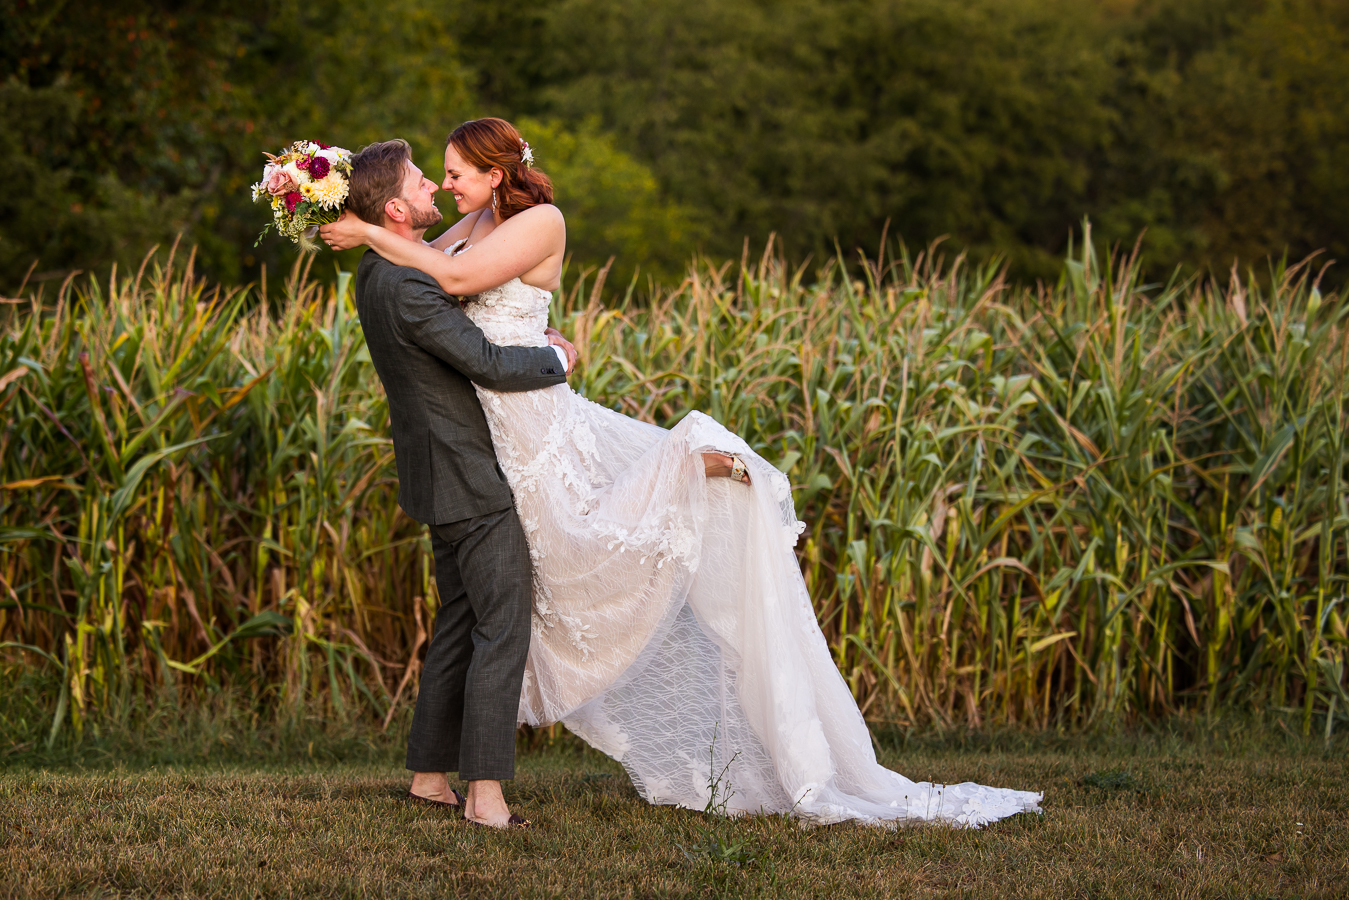 pa wedding photographer, lisa rhinehart, captures this image of the bride and groom he lifts the bride up and they look into each others eyes as they stand against the corn field behind them at this warfordsburg pa wedding venue, alpine acres